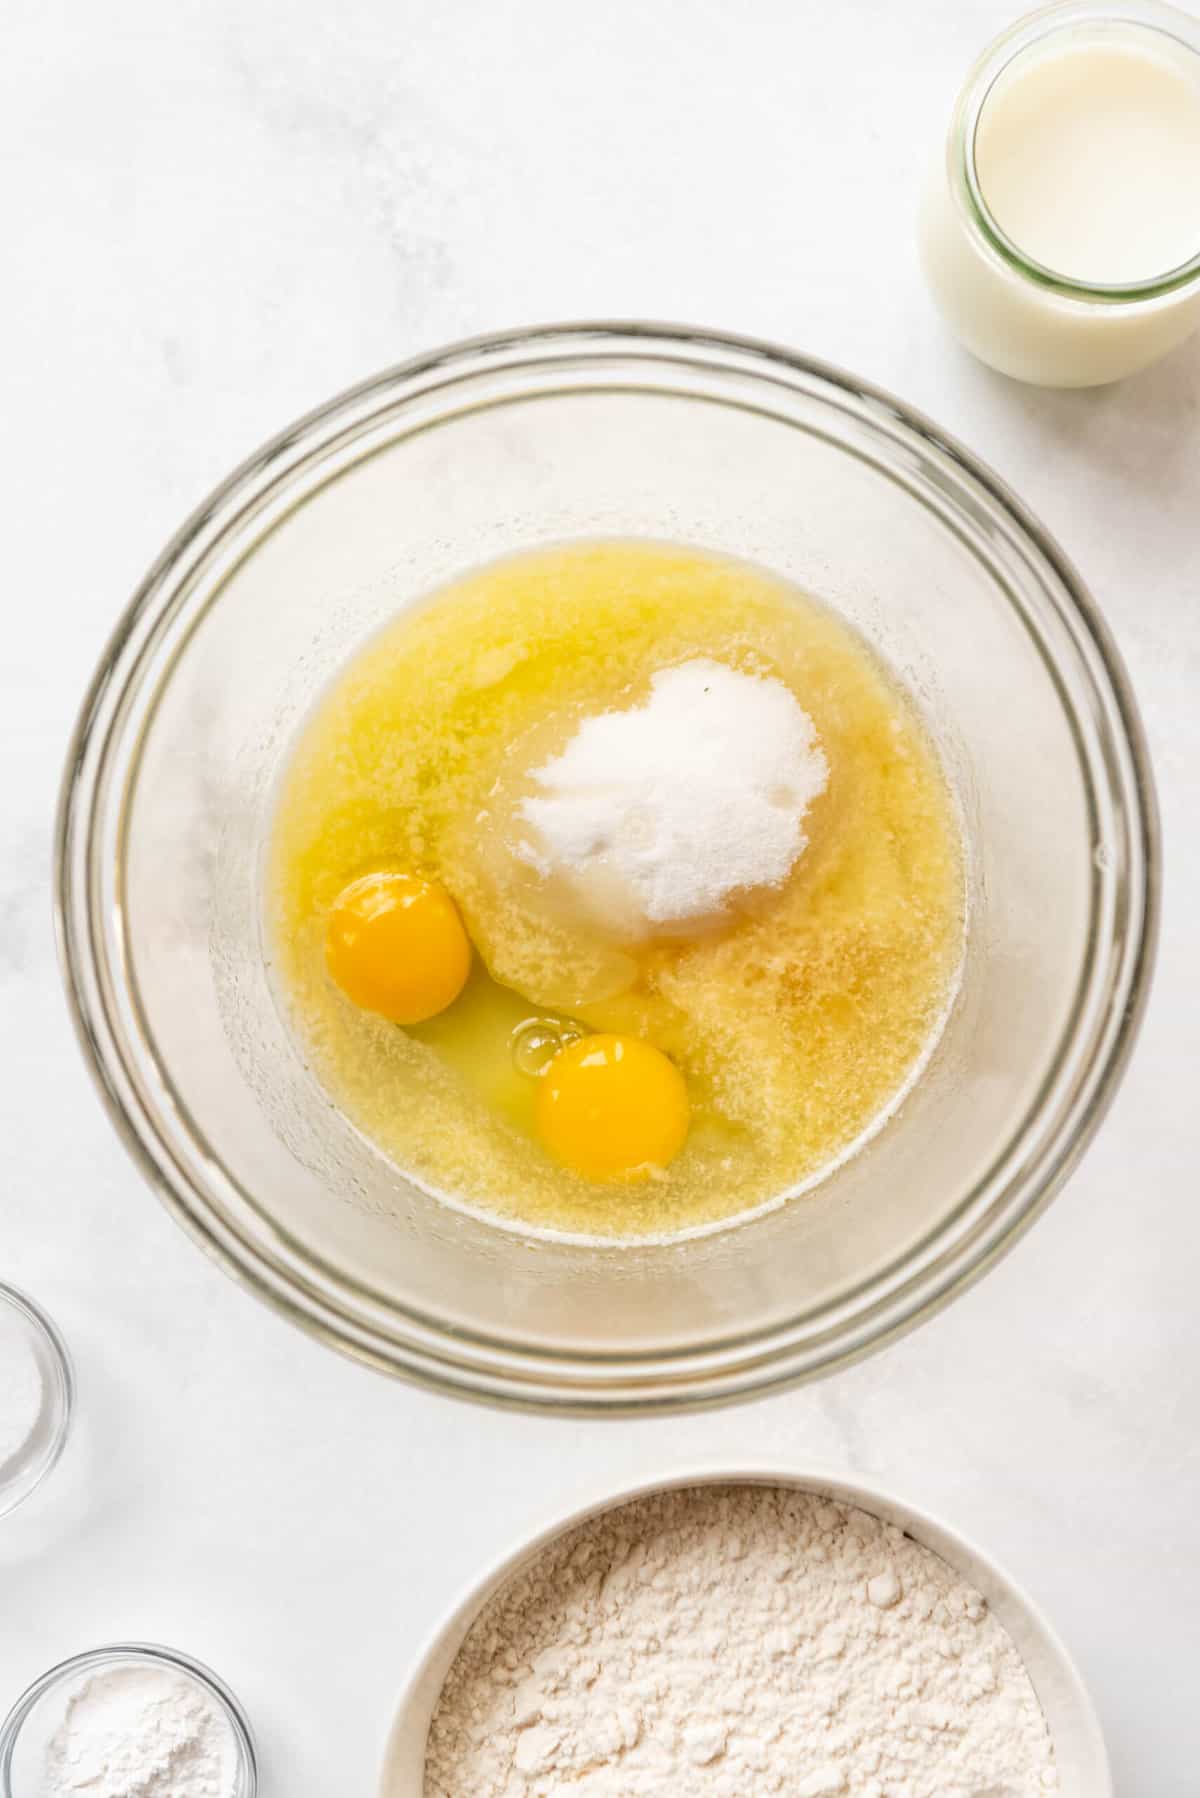 Eggs, melted butter, oil, sugar, and vanilla extract in a glass mixing bowl.